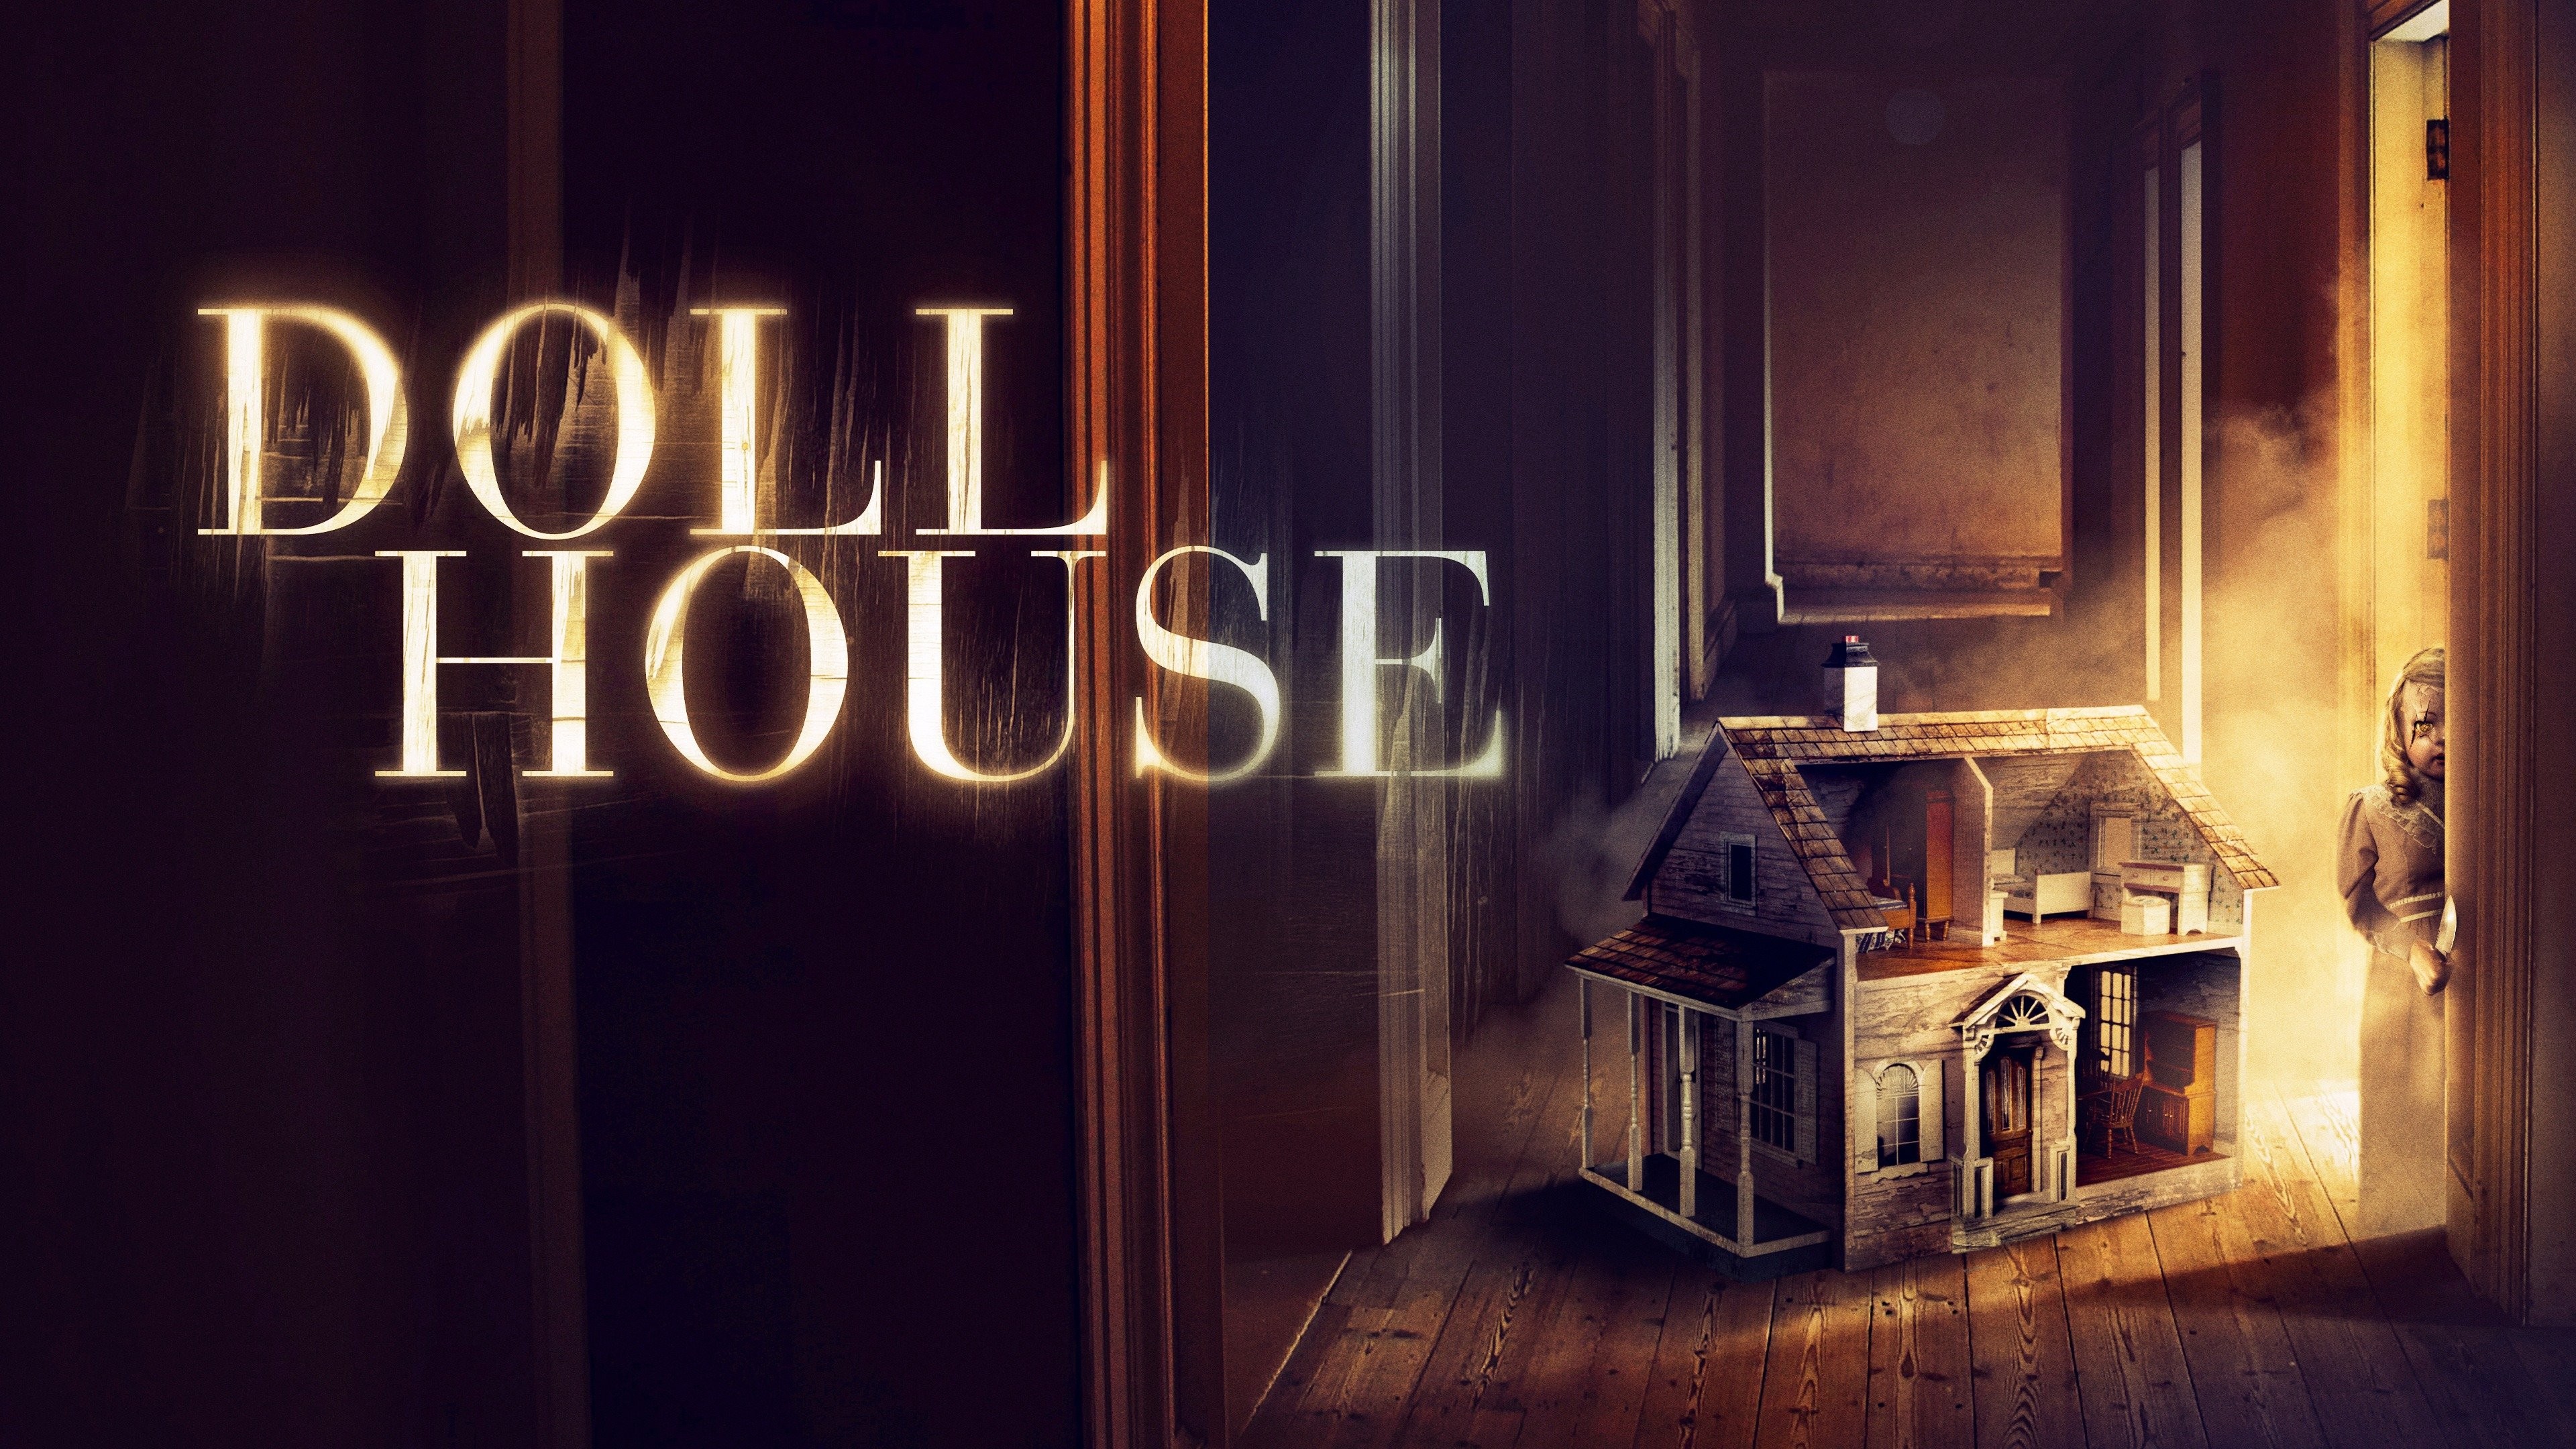 The Movie — The Baby Doll House